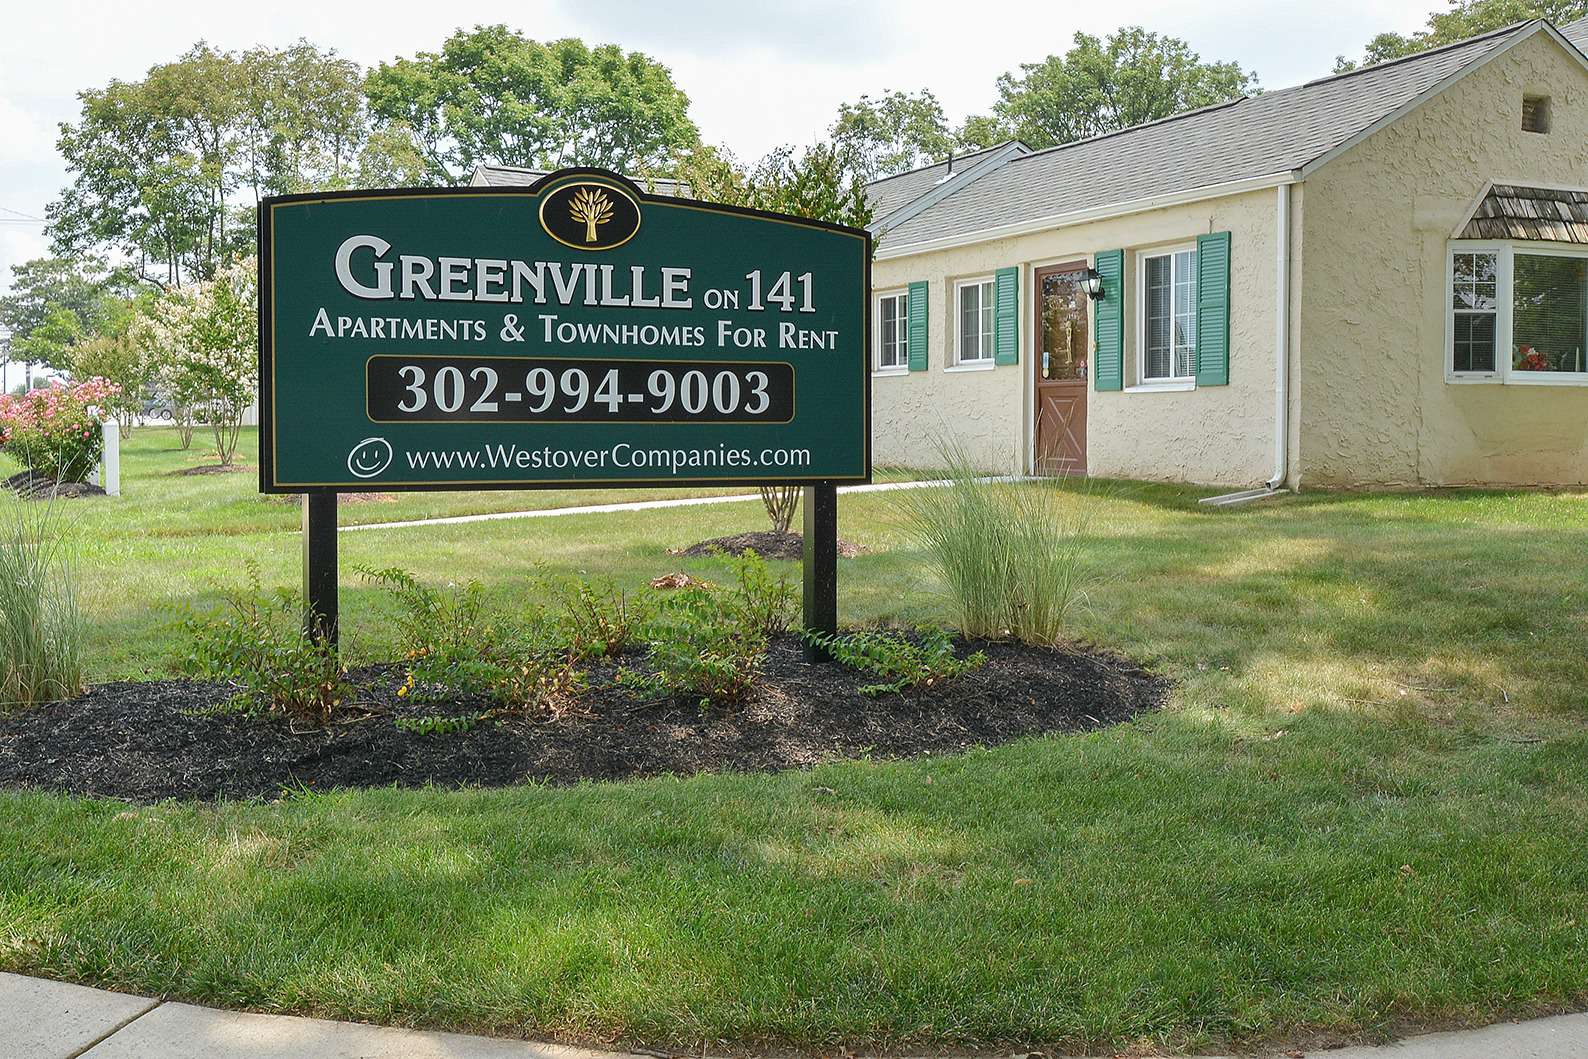 Greenville on 141 Apartments and Townhomes sign on landscaped grass.